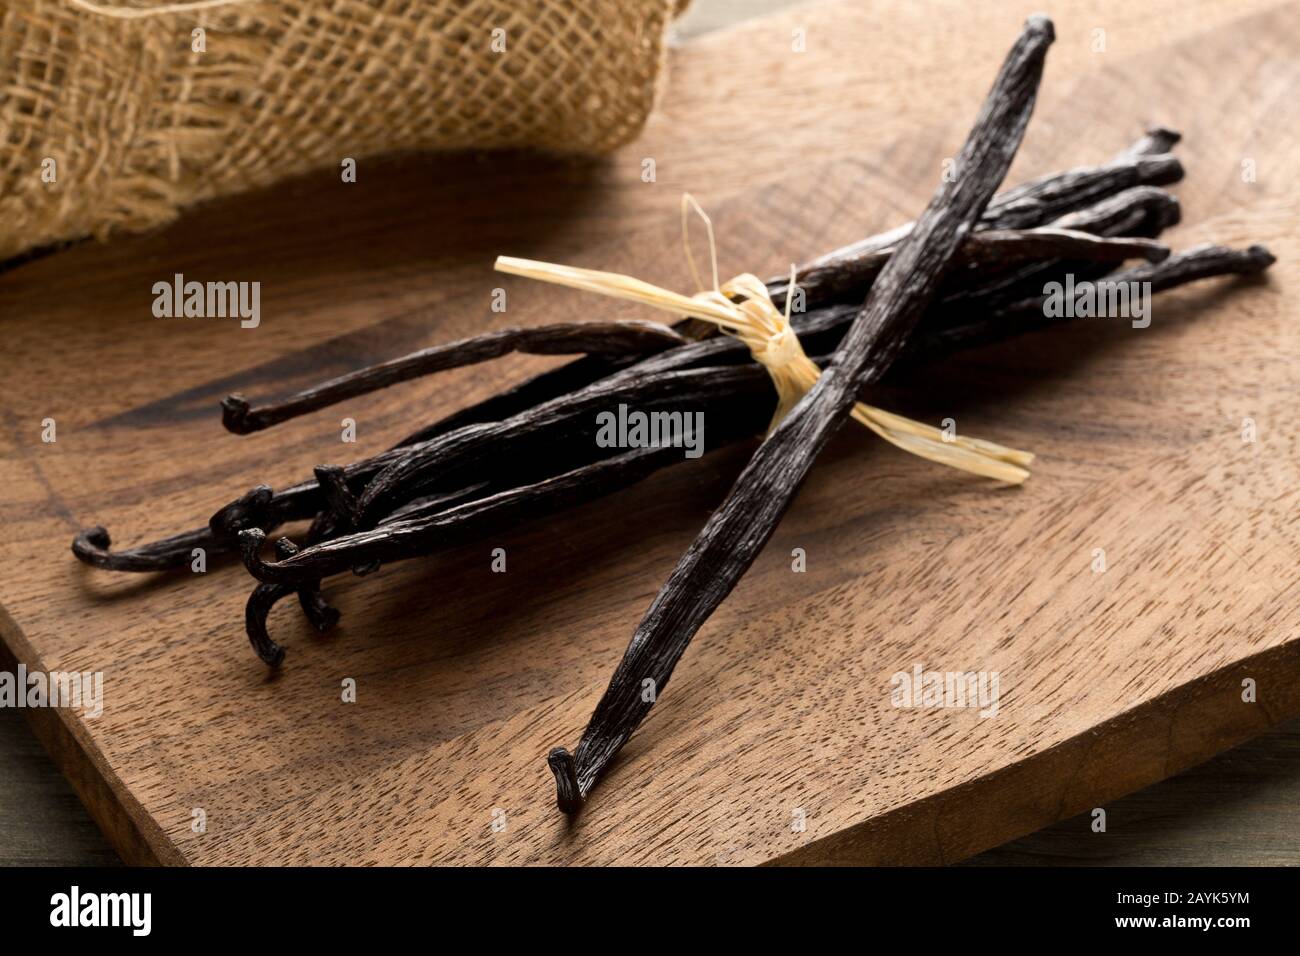 Bundle of tied, dried bourbon vanilla beans or pods on brown wooden cutting board with burlap sack - selective focus Stock Photo